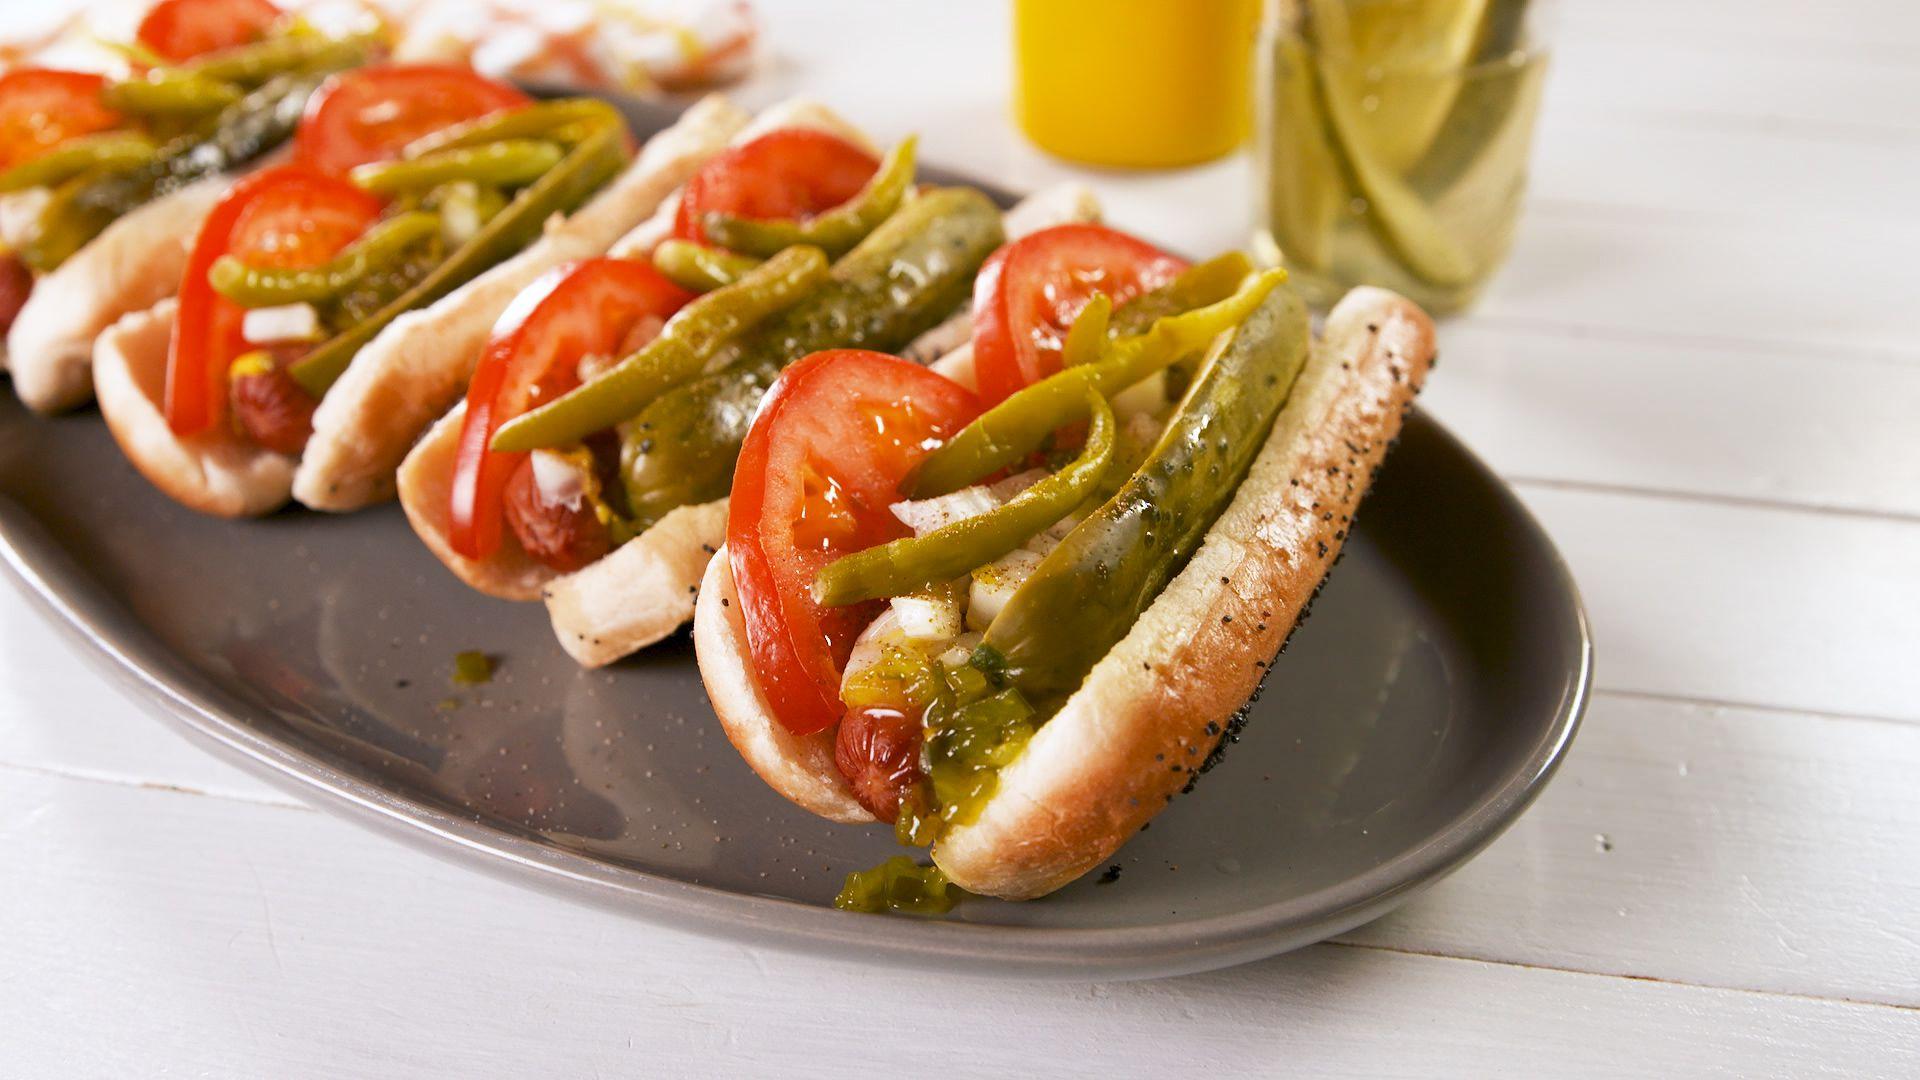 Best Chicago Style Hot Dogs Recipe to Make Chicago Style Hot Dogs